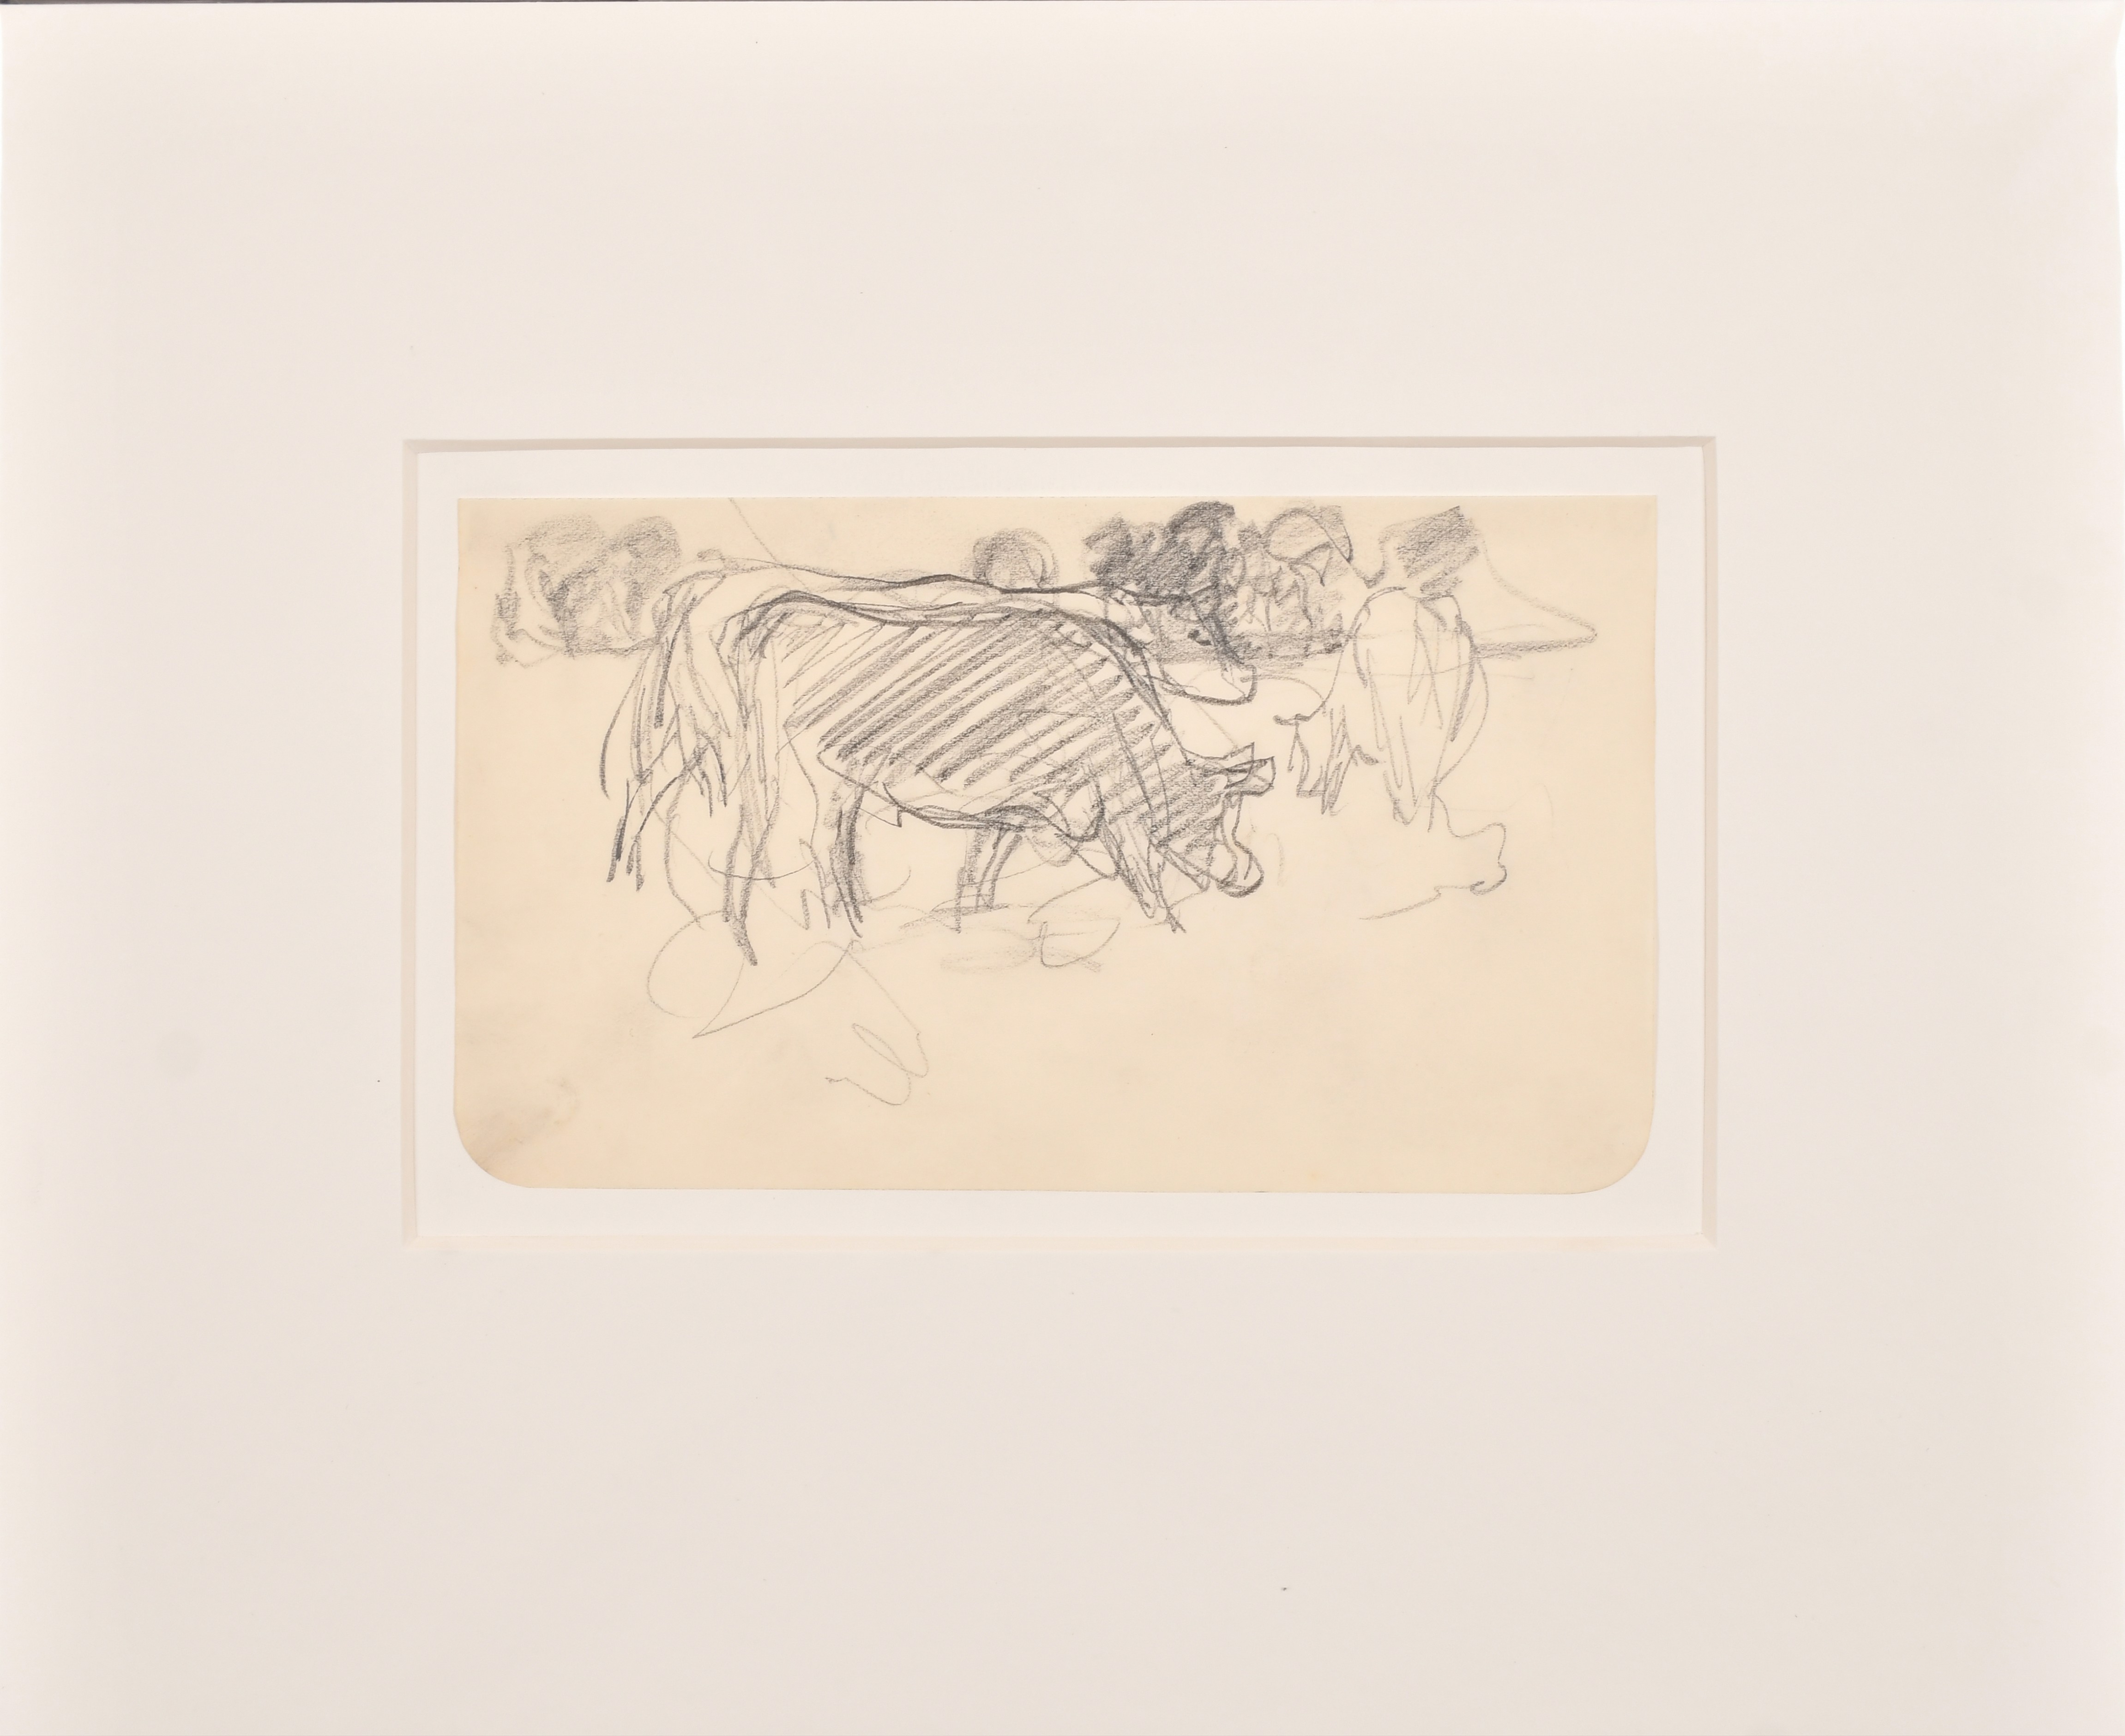 Harry Becker (1865-1928) British. "Man Milking", Pencil from a sketchbook, Inscribed on a label - Image 4 of 5